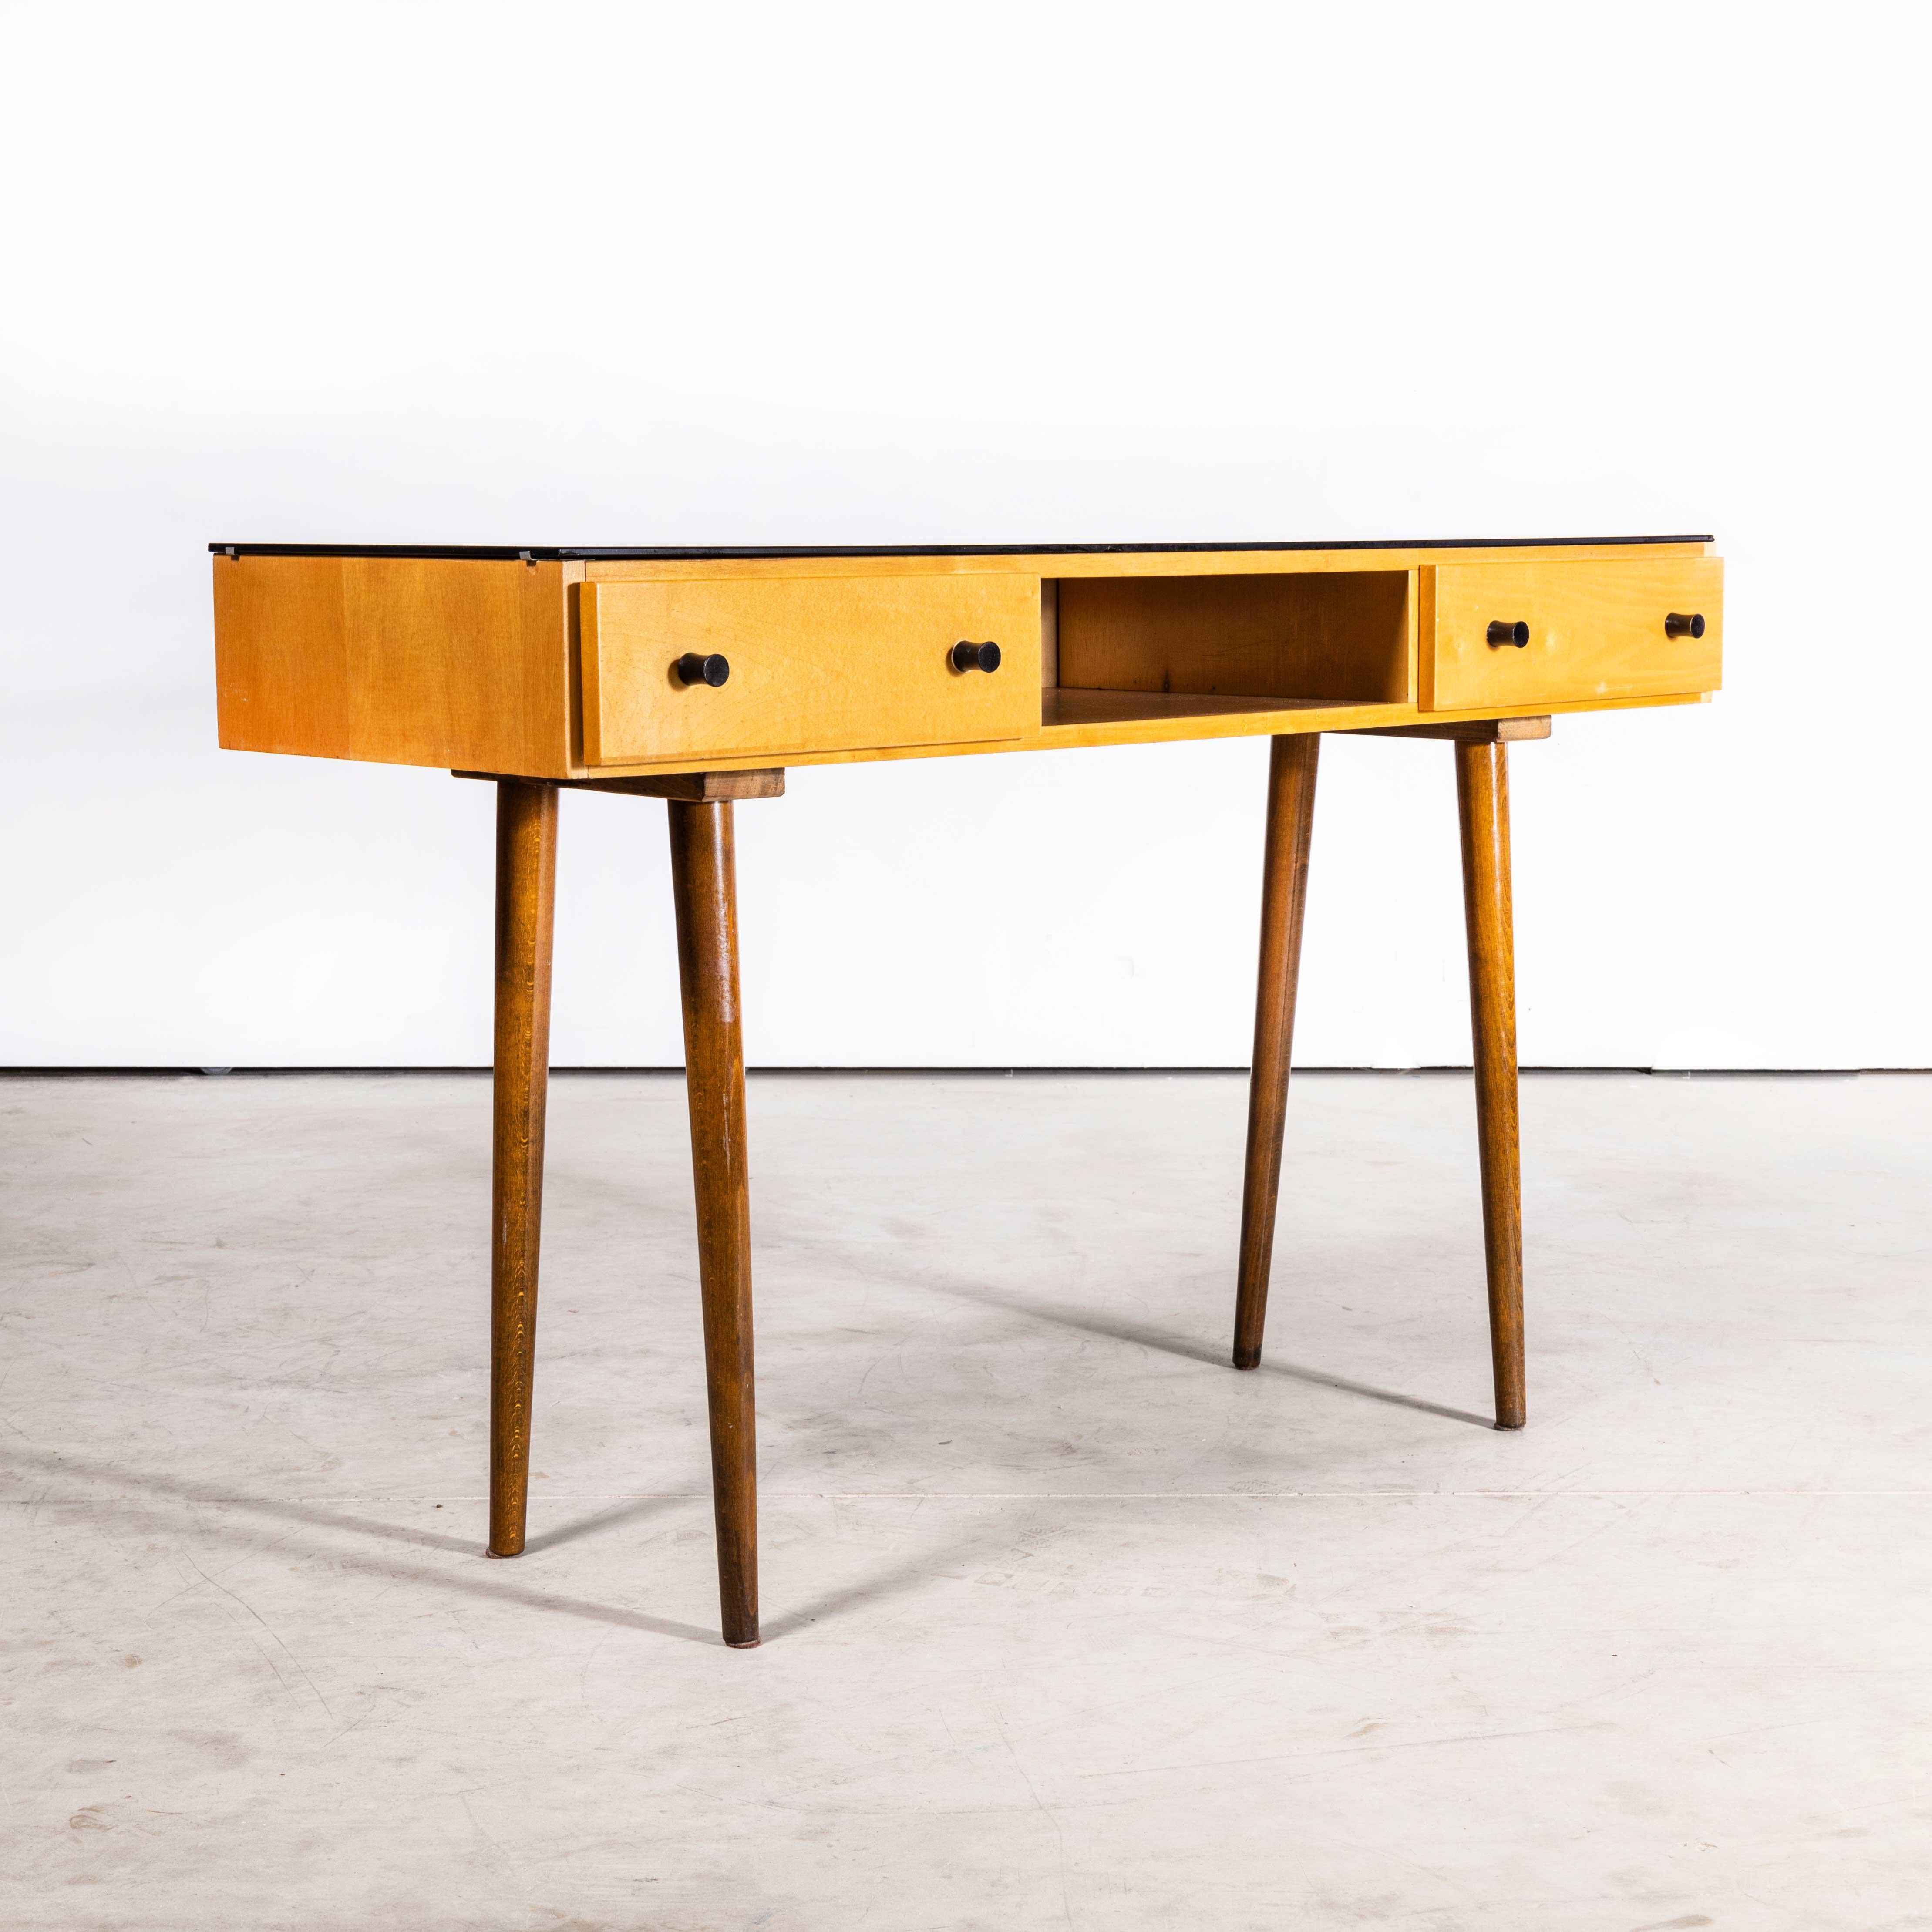 1950s Refined Rectangular Dressing Table – Small Desk
1950s Refined Rectangular Dressing Table – Small Desk. Beautiful simple and Classic mid-century side table sourced in the Czech Republic. Czech design will always be affiliated to the Bauhaus